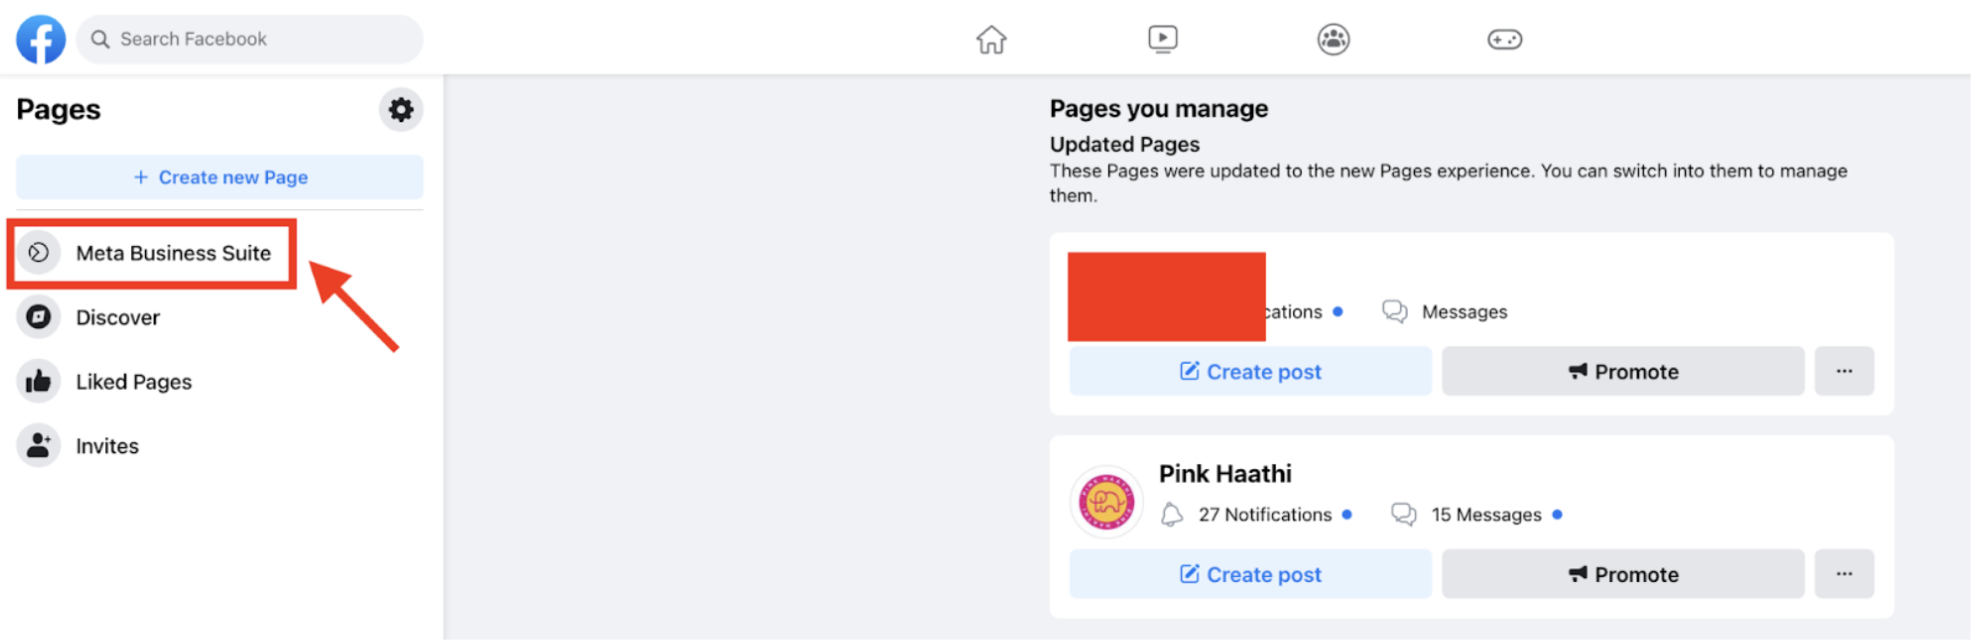 How to access Meta Business Suite from Facebook Pages. The image shows the Pages feed with an arrow and box guiding where you can find Meta Business Suite.